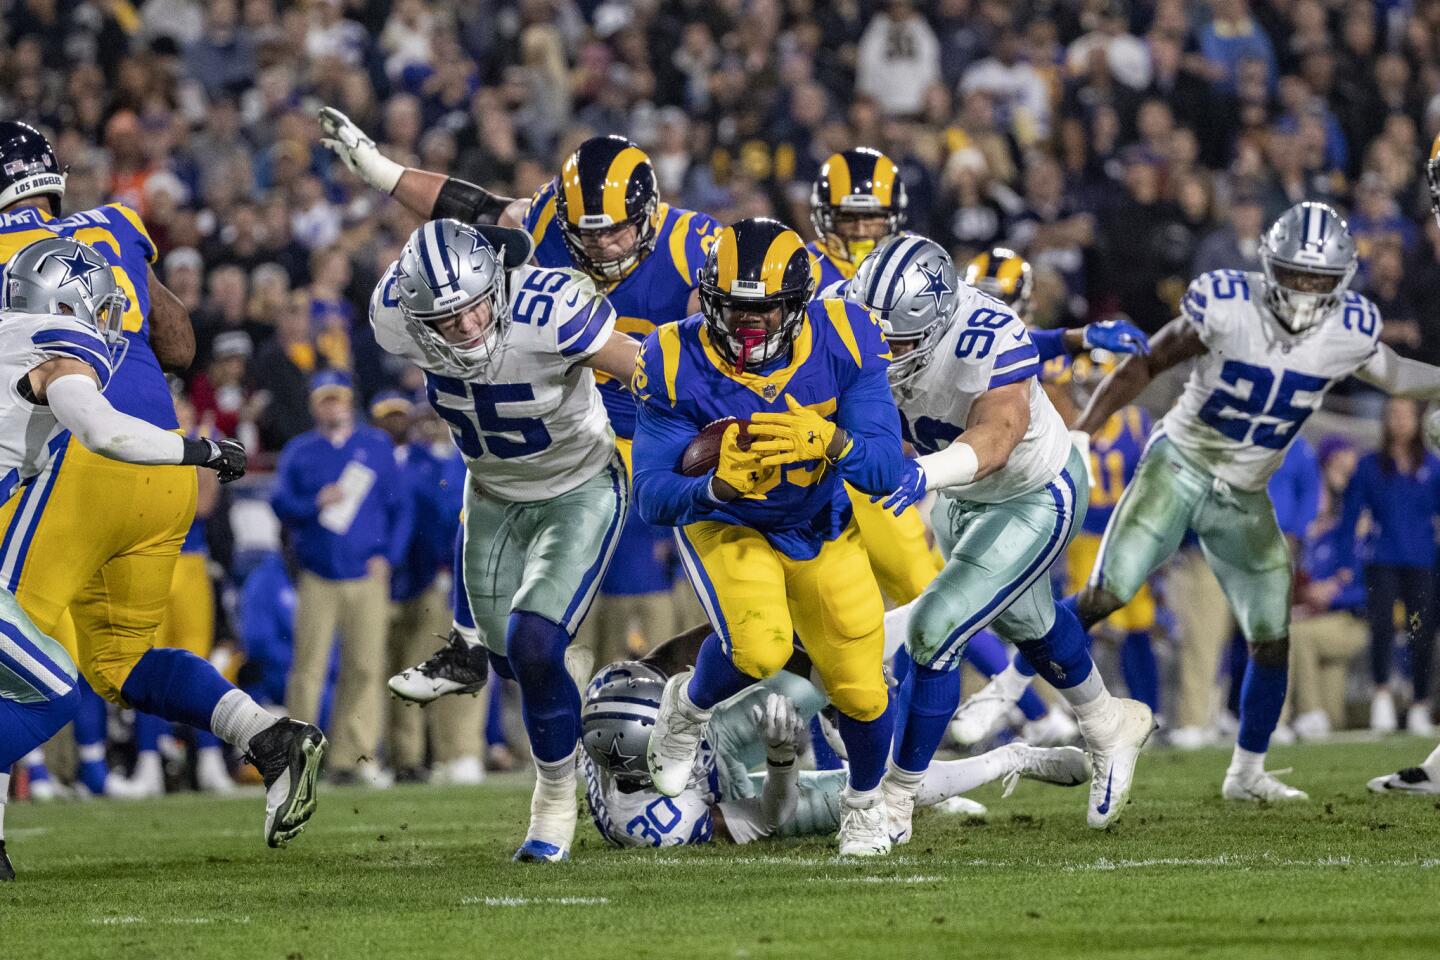 Rams running back C.J. Anderson (35) breaks through tackle attempts of Cowboys outside linebacker Leighton Vander Esch (55) and defensive tackle Tyrone Crawford (98) for extra yardage during the first half.